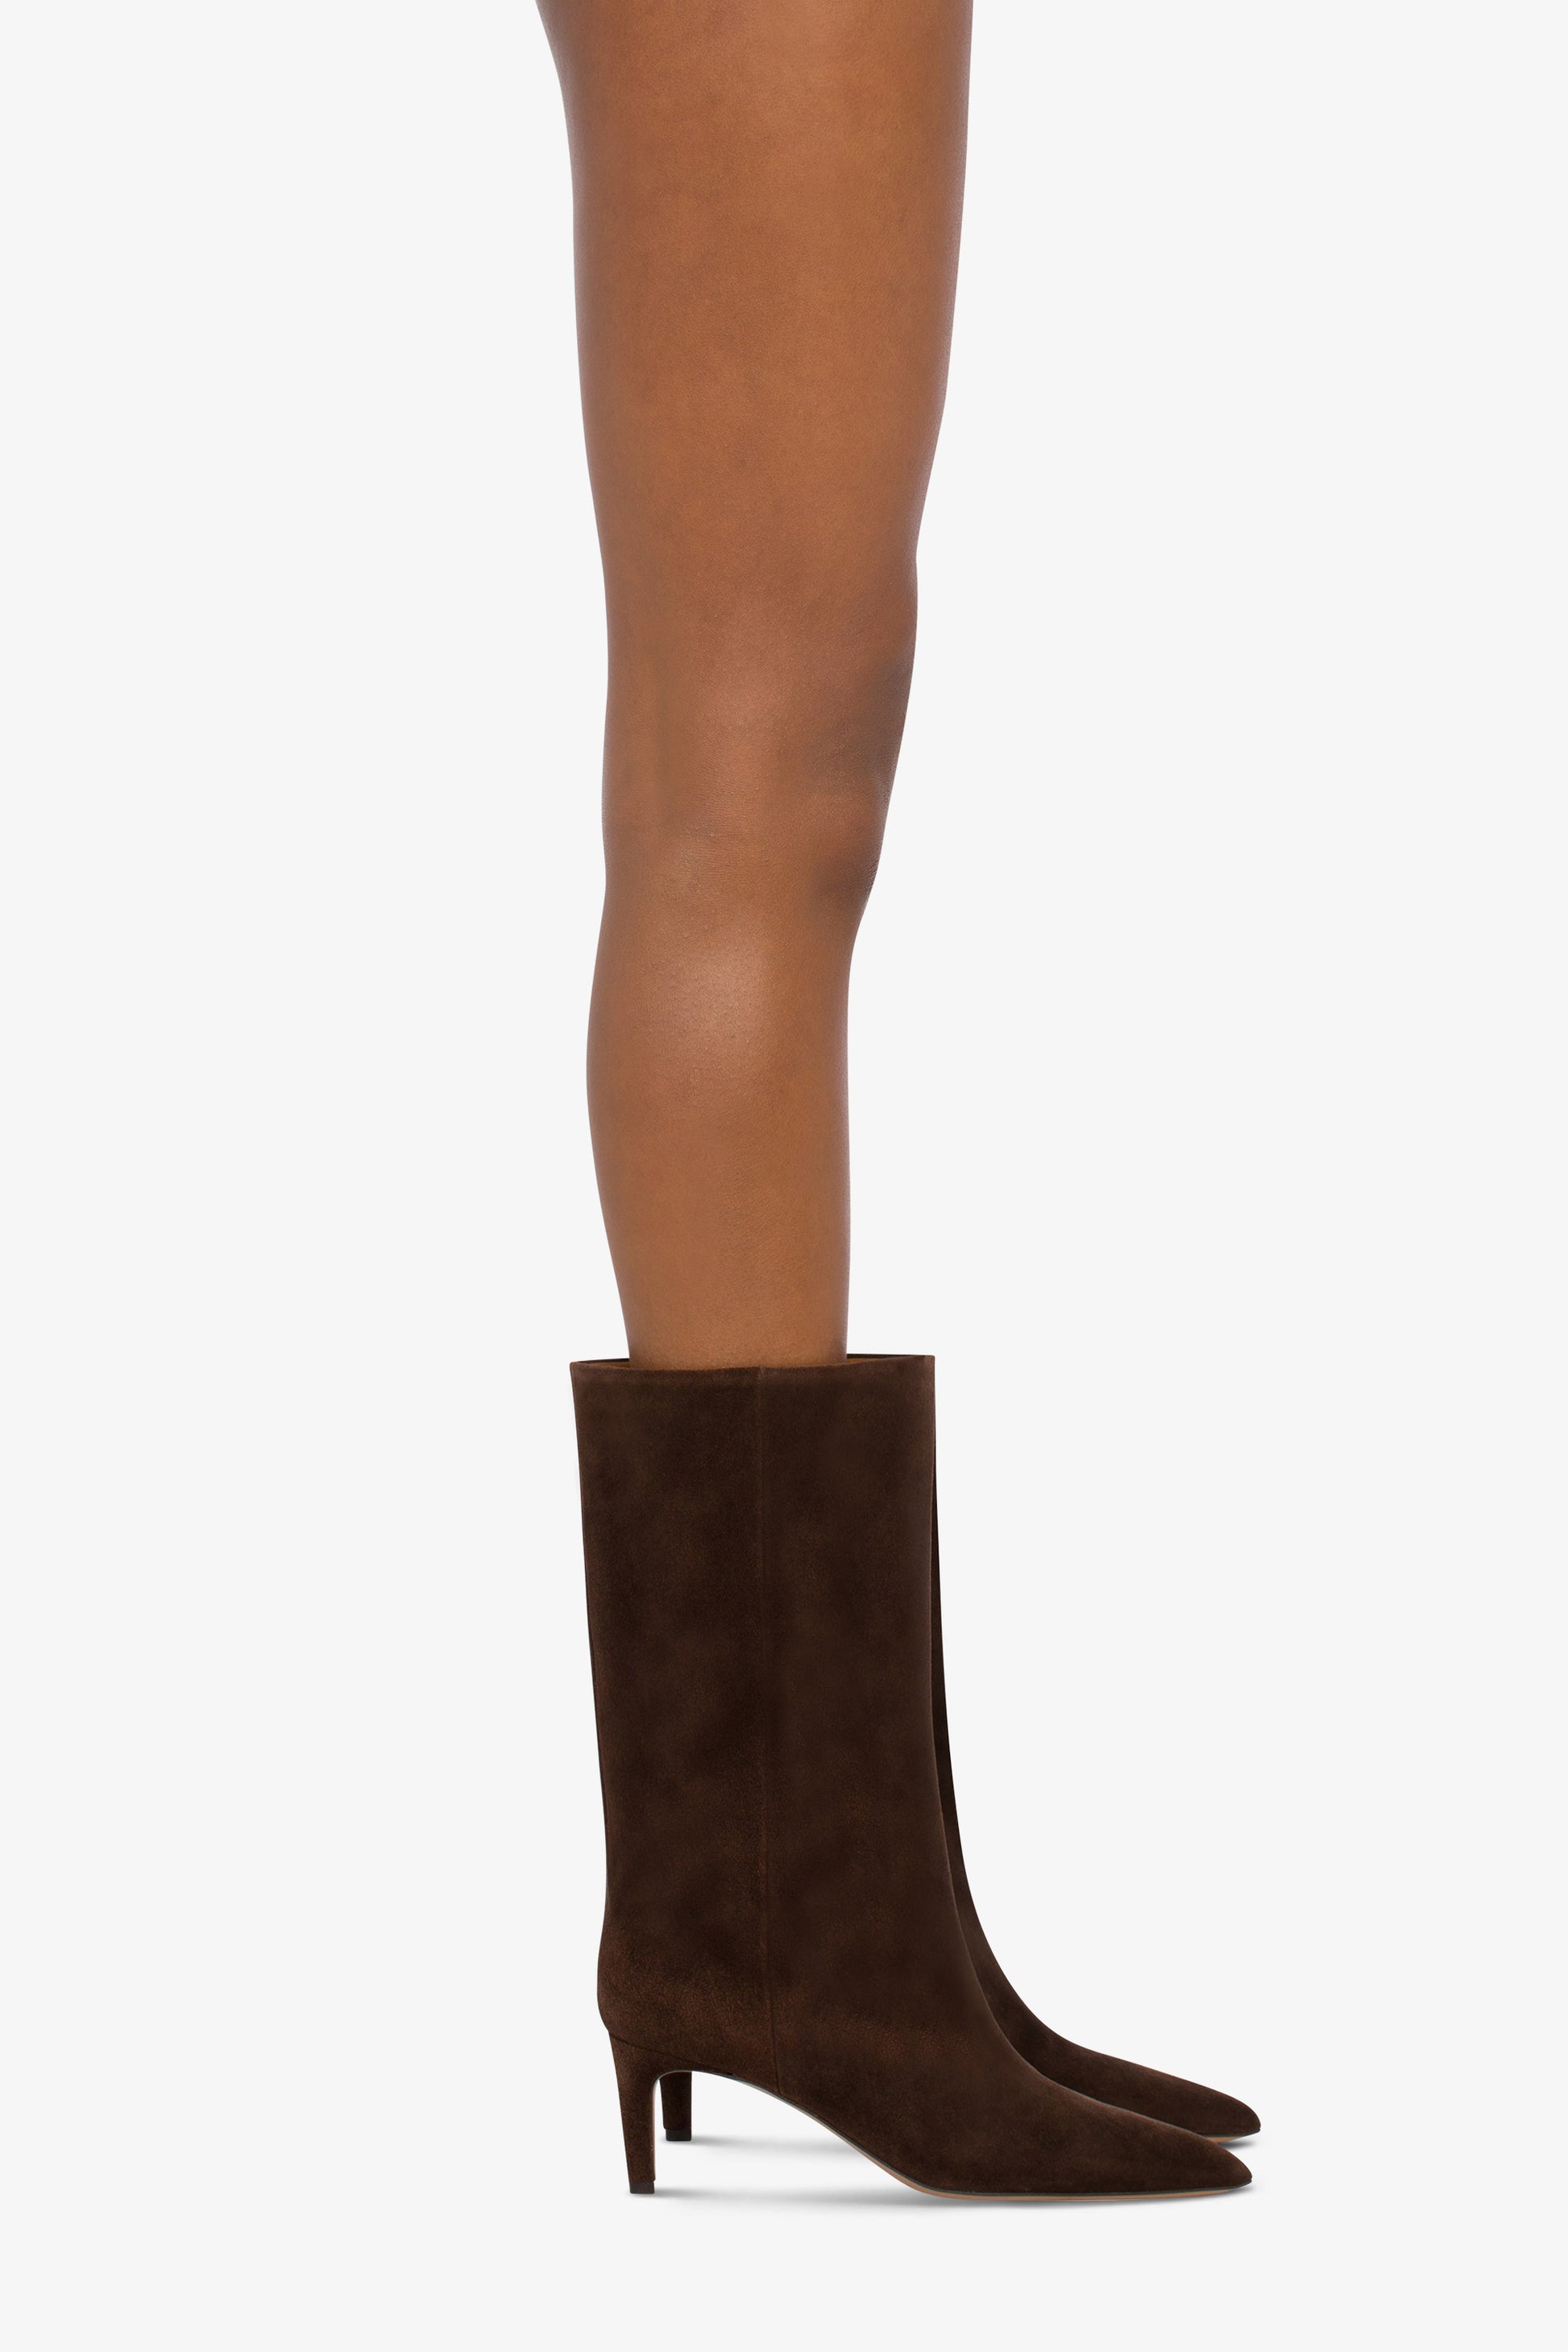 Calf-high boots in smooth pepper suede leather - Product worn